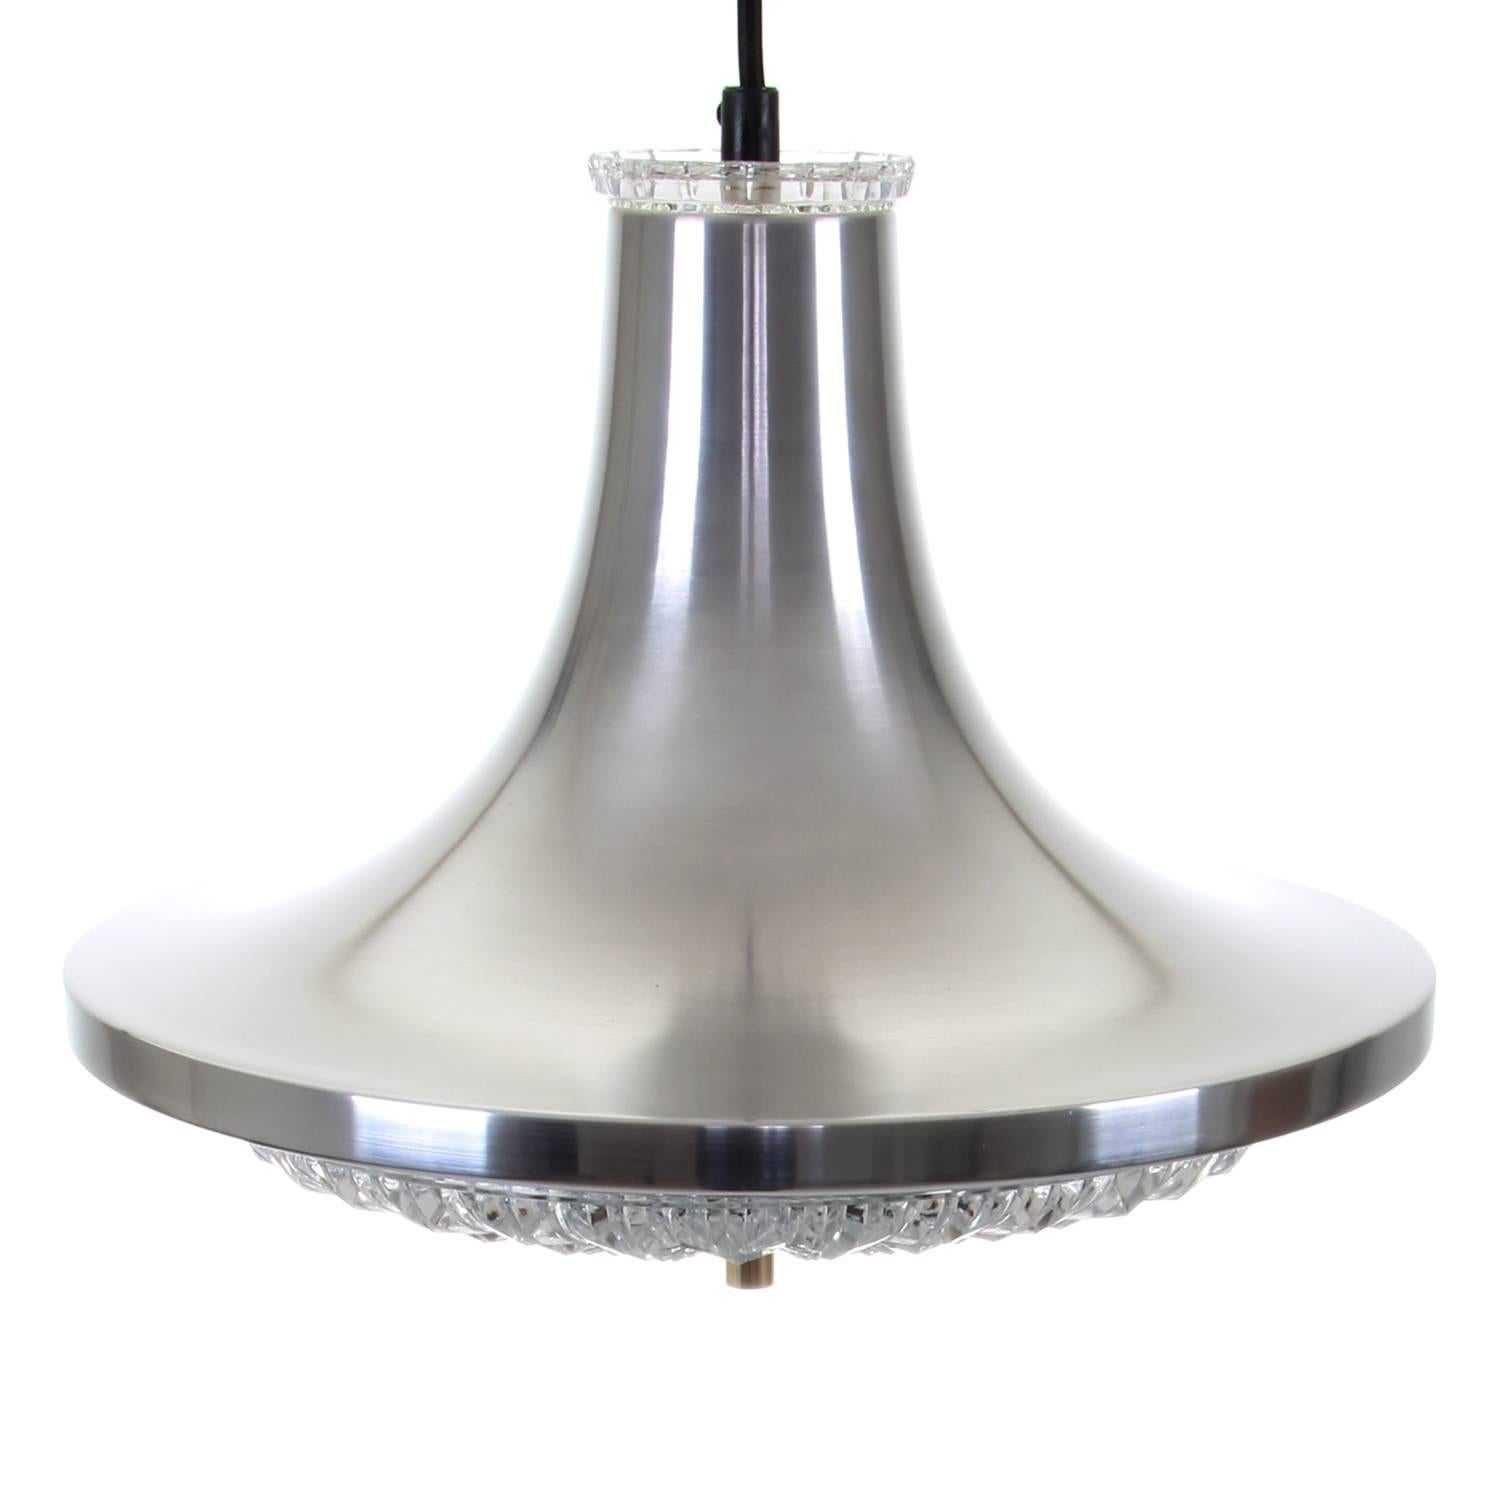 Aluminum and Crystal Pendant by Vitrika, 1960s Danish Modern Ceiling Light In Good Condition For Sale In Frederiksberg, DK